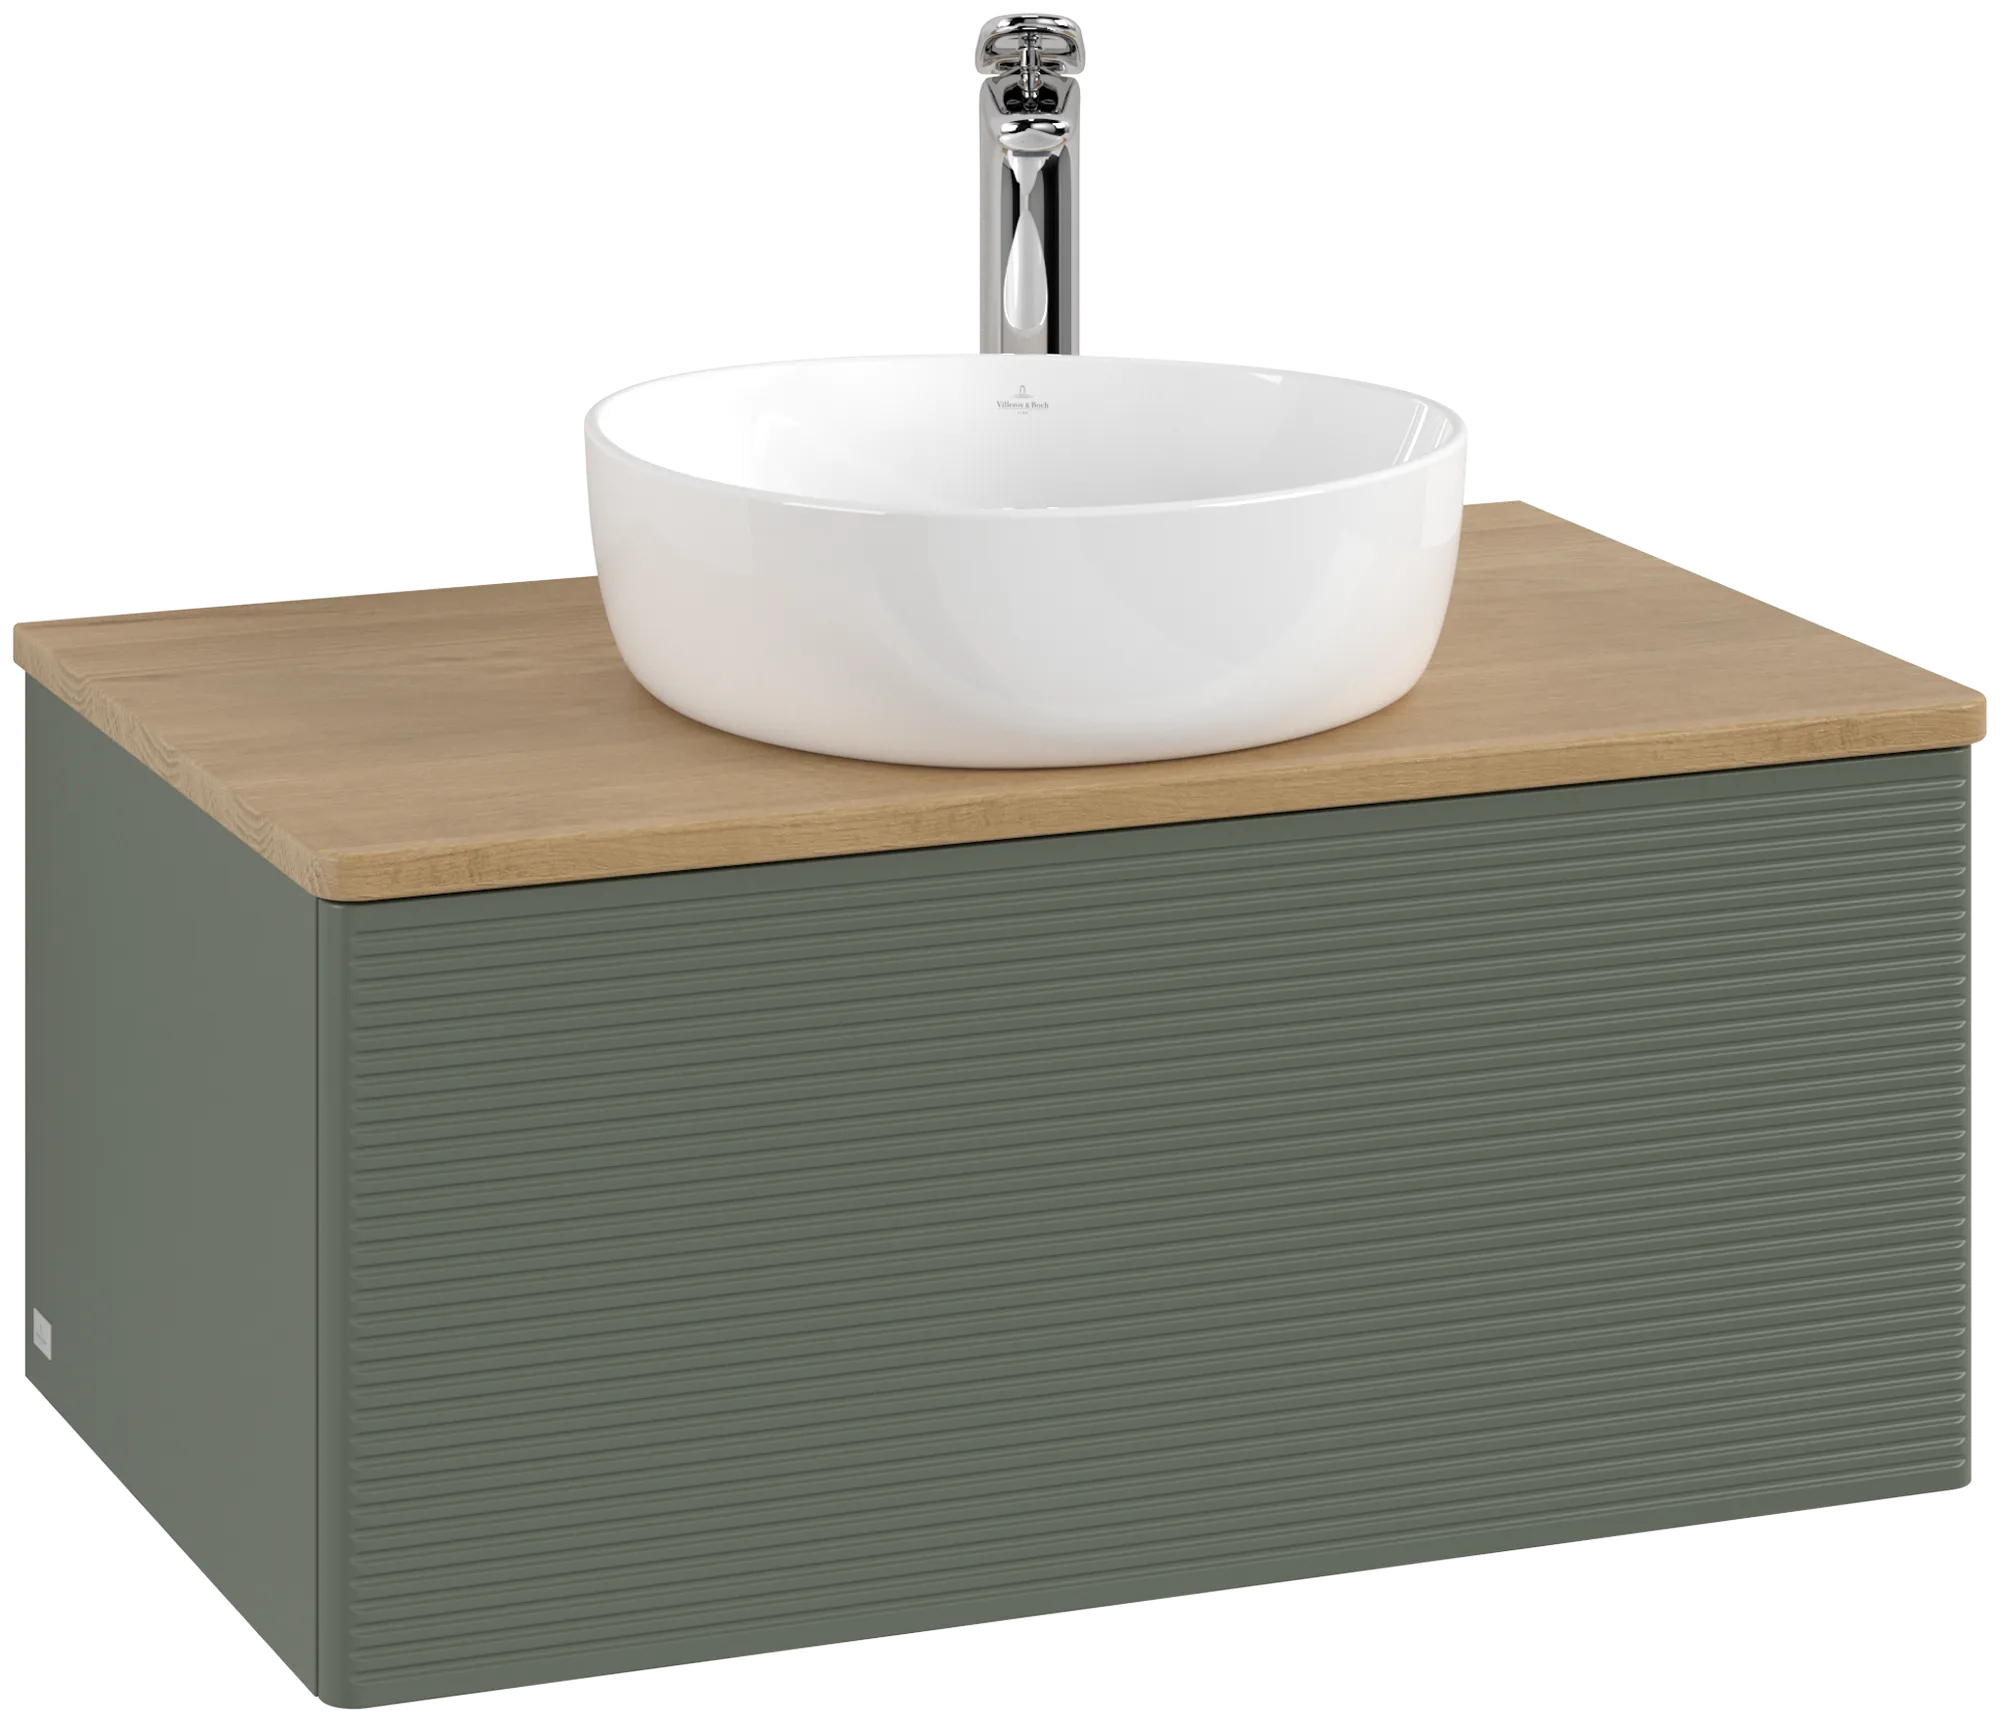 Obrázek VILLEROY BOCH Antao Vanity unit, with lighting, 1 pull-out compartment, 800 x 360 x 500 mm, Front with grain texture, Leaf Green Matt Lacquer / Honey Oak #L30151HL